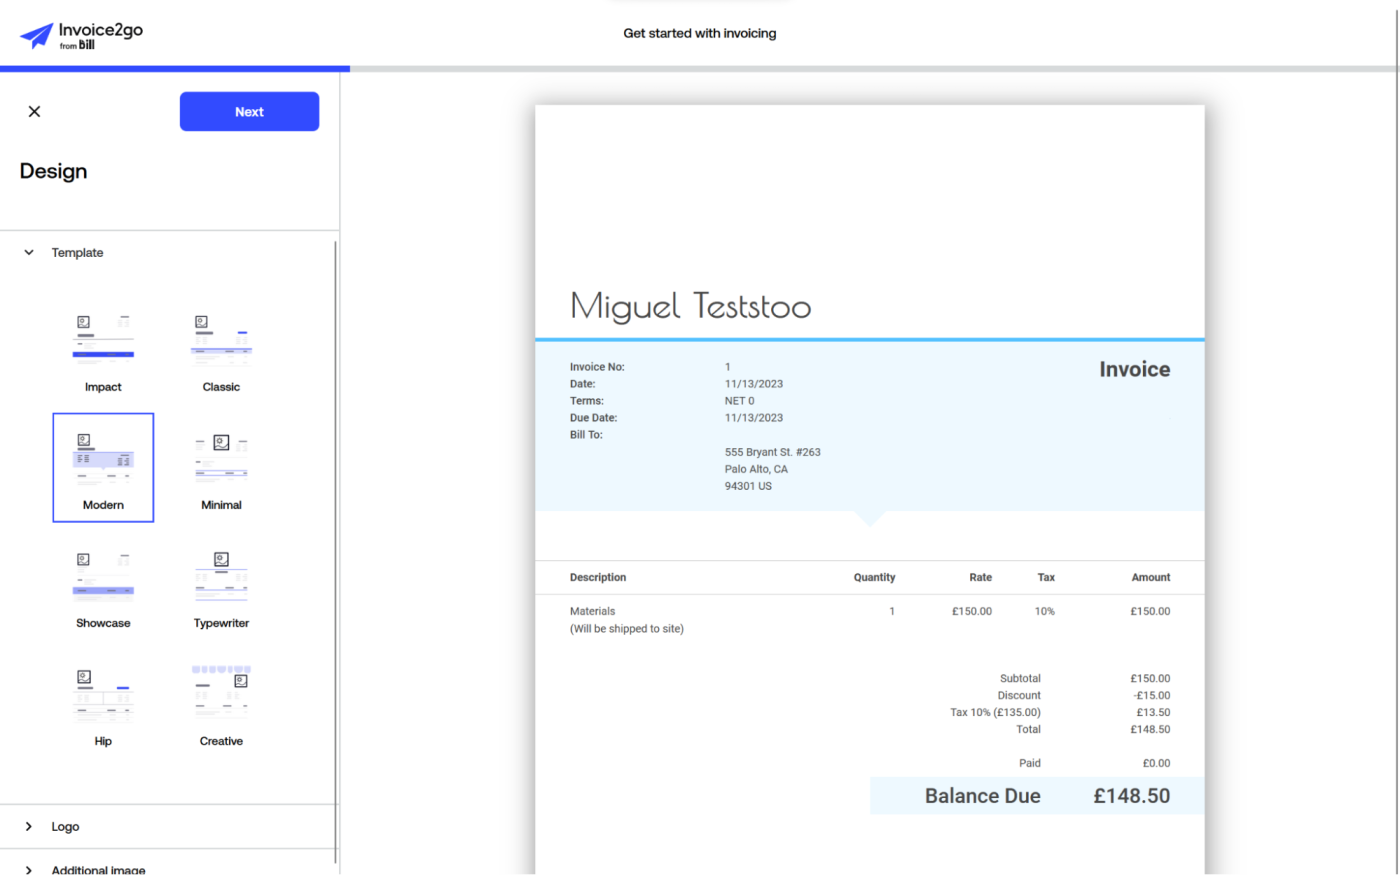 Invoice2go, our pick for the best invoicing software for sending invoices by mobile messaging apps